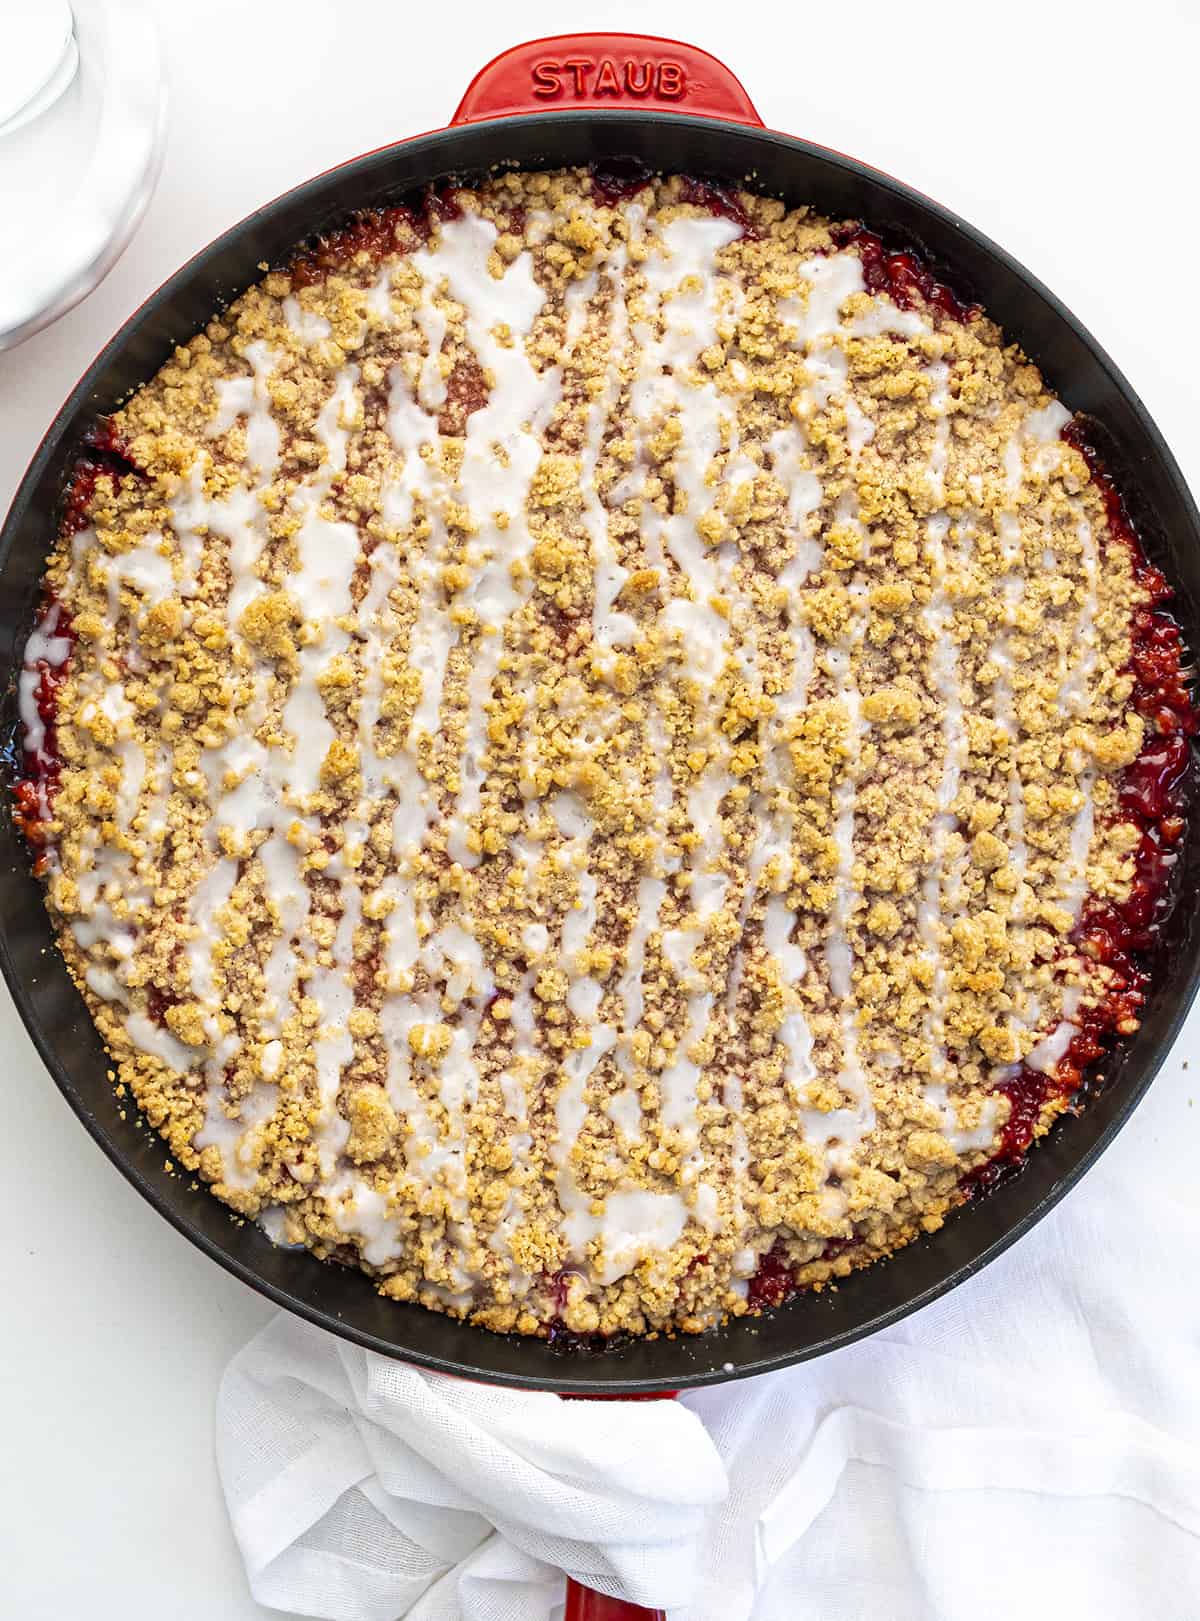 Skillet Strawberry Crumble in the Skillet from Overhead